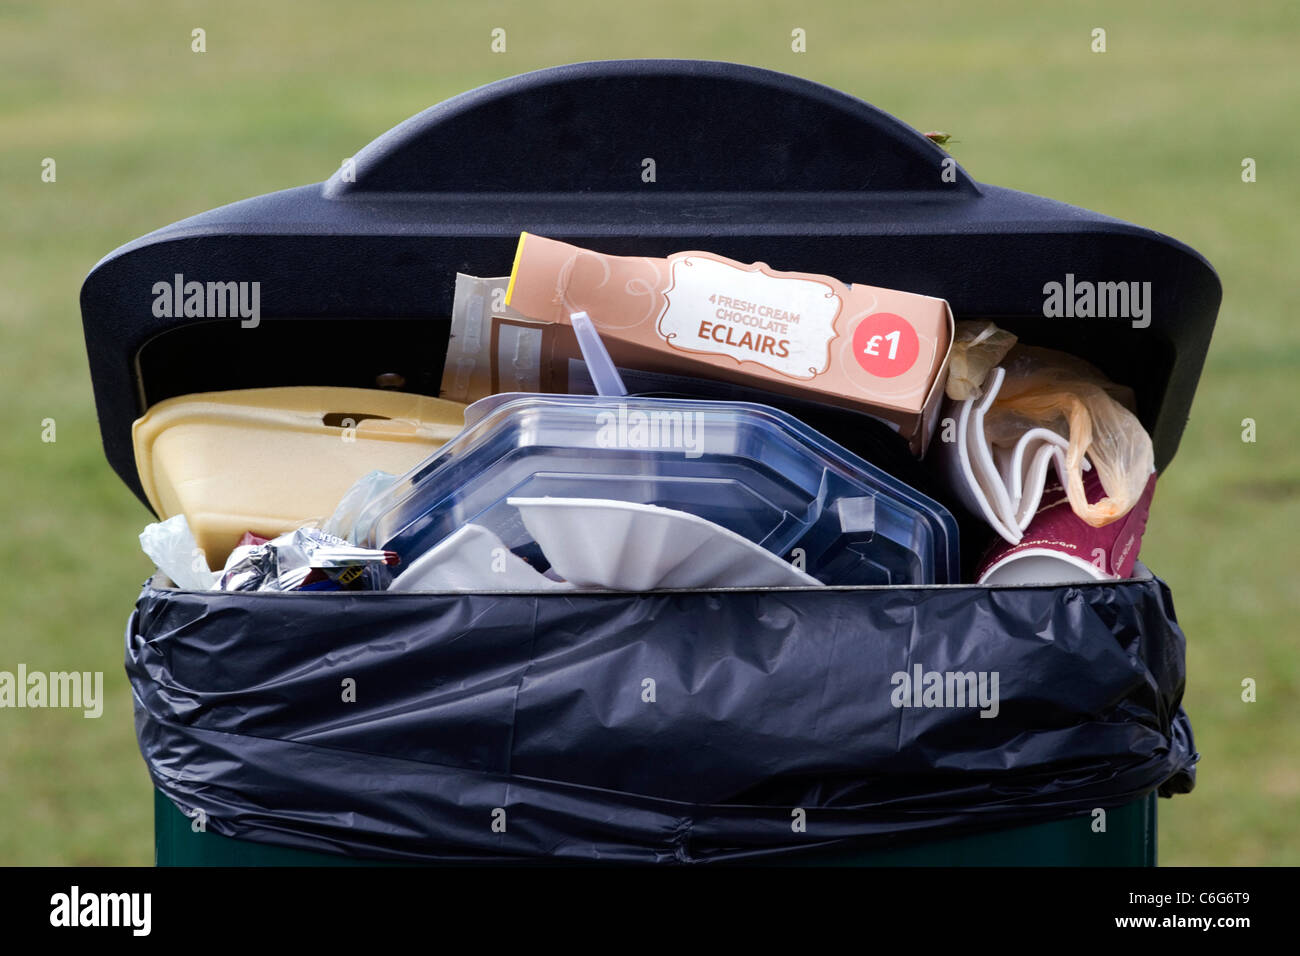 overflowing litter bin at a public event Stock Photo